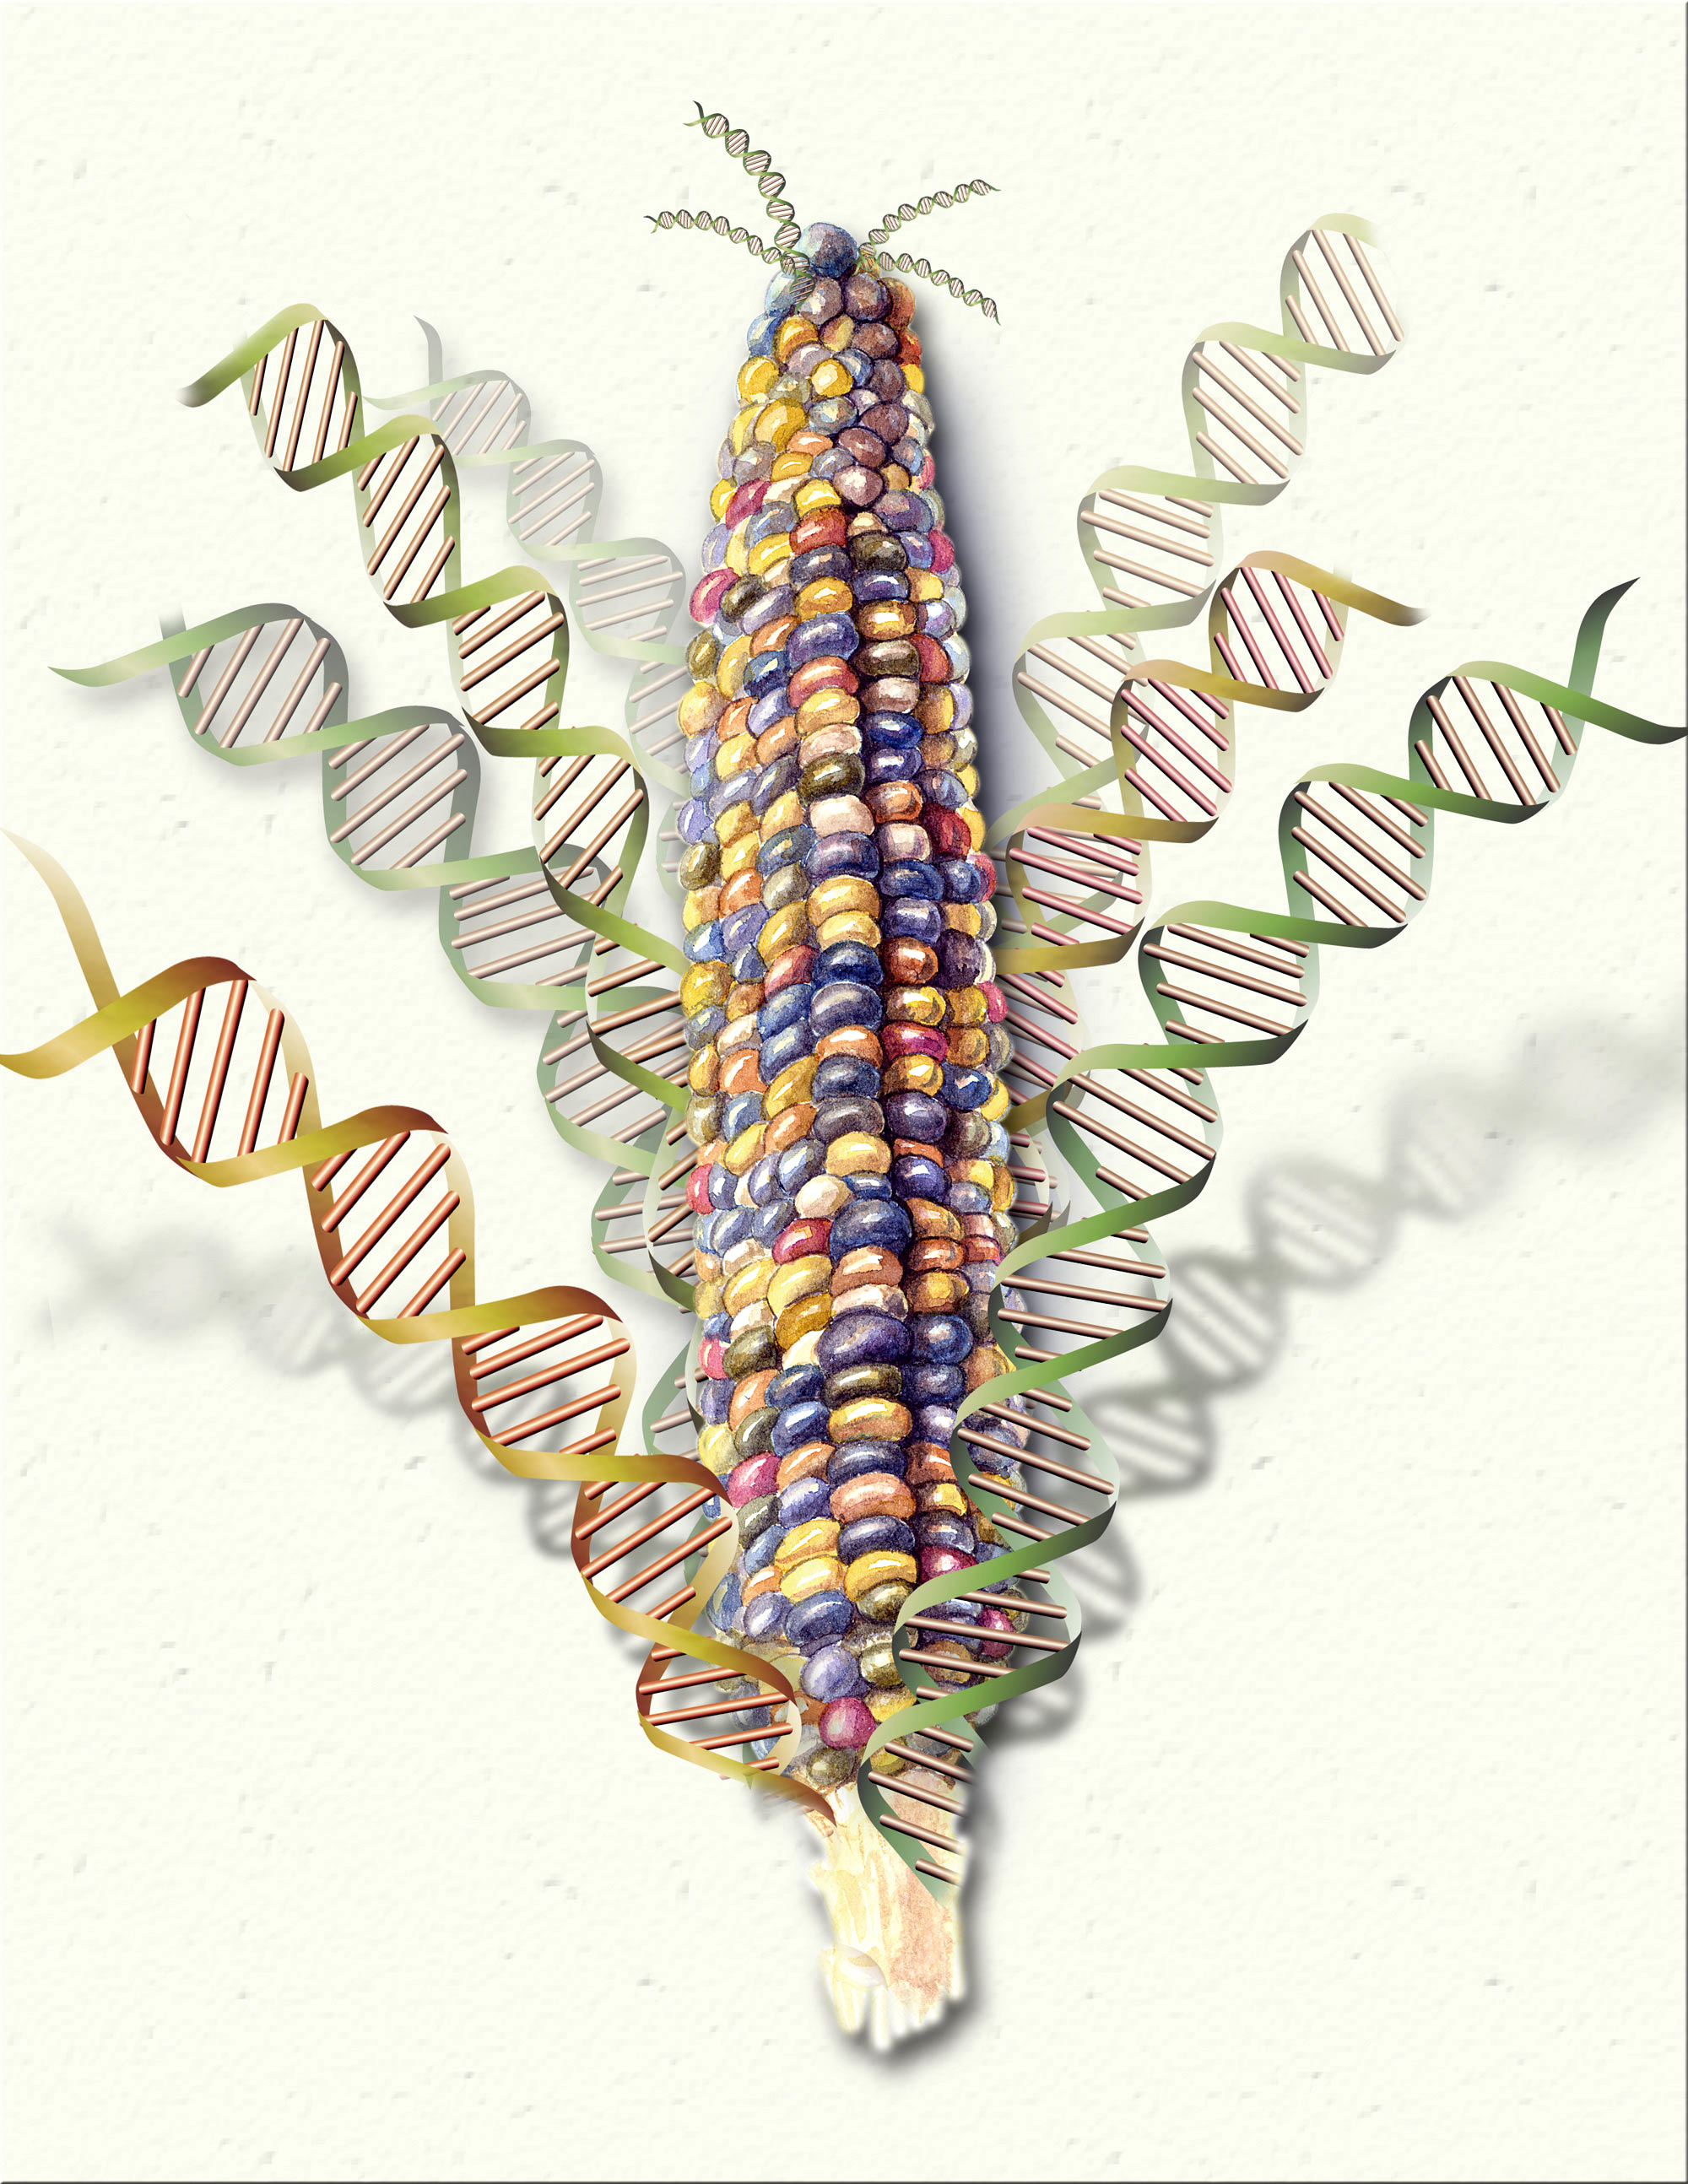 Scientists Complete Most Comprehensive Analysis Yet of Corn